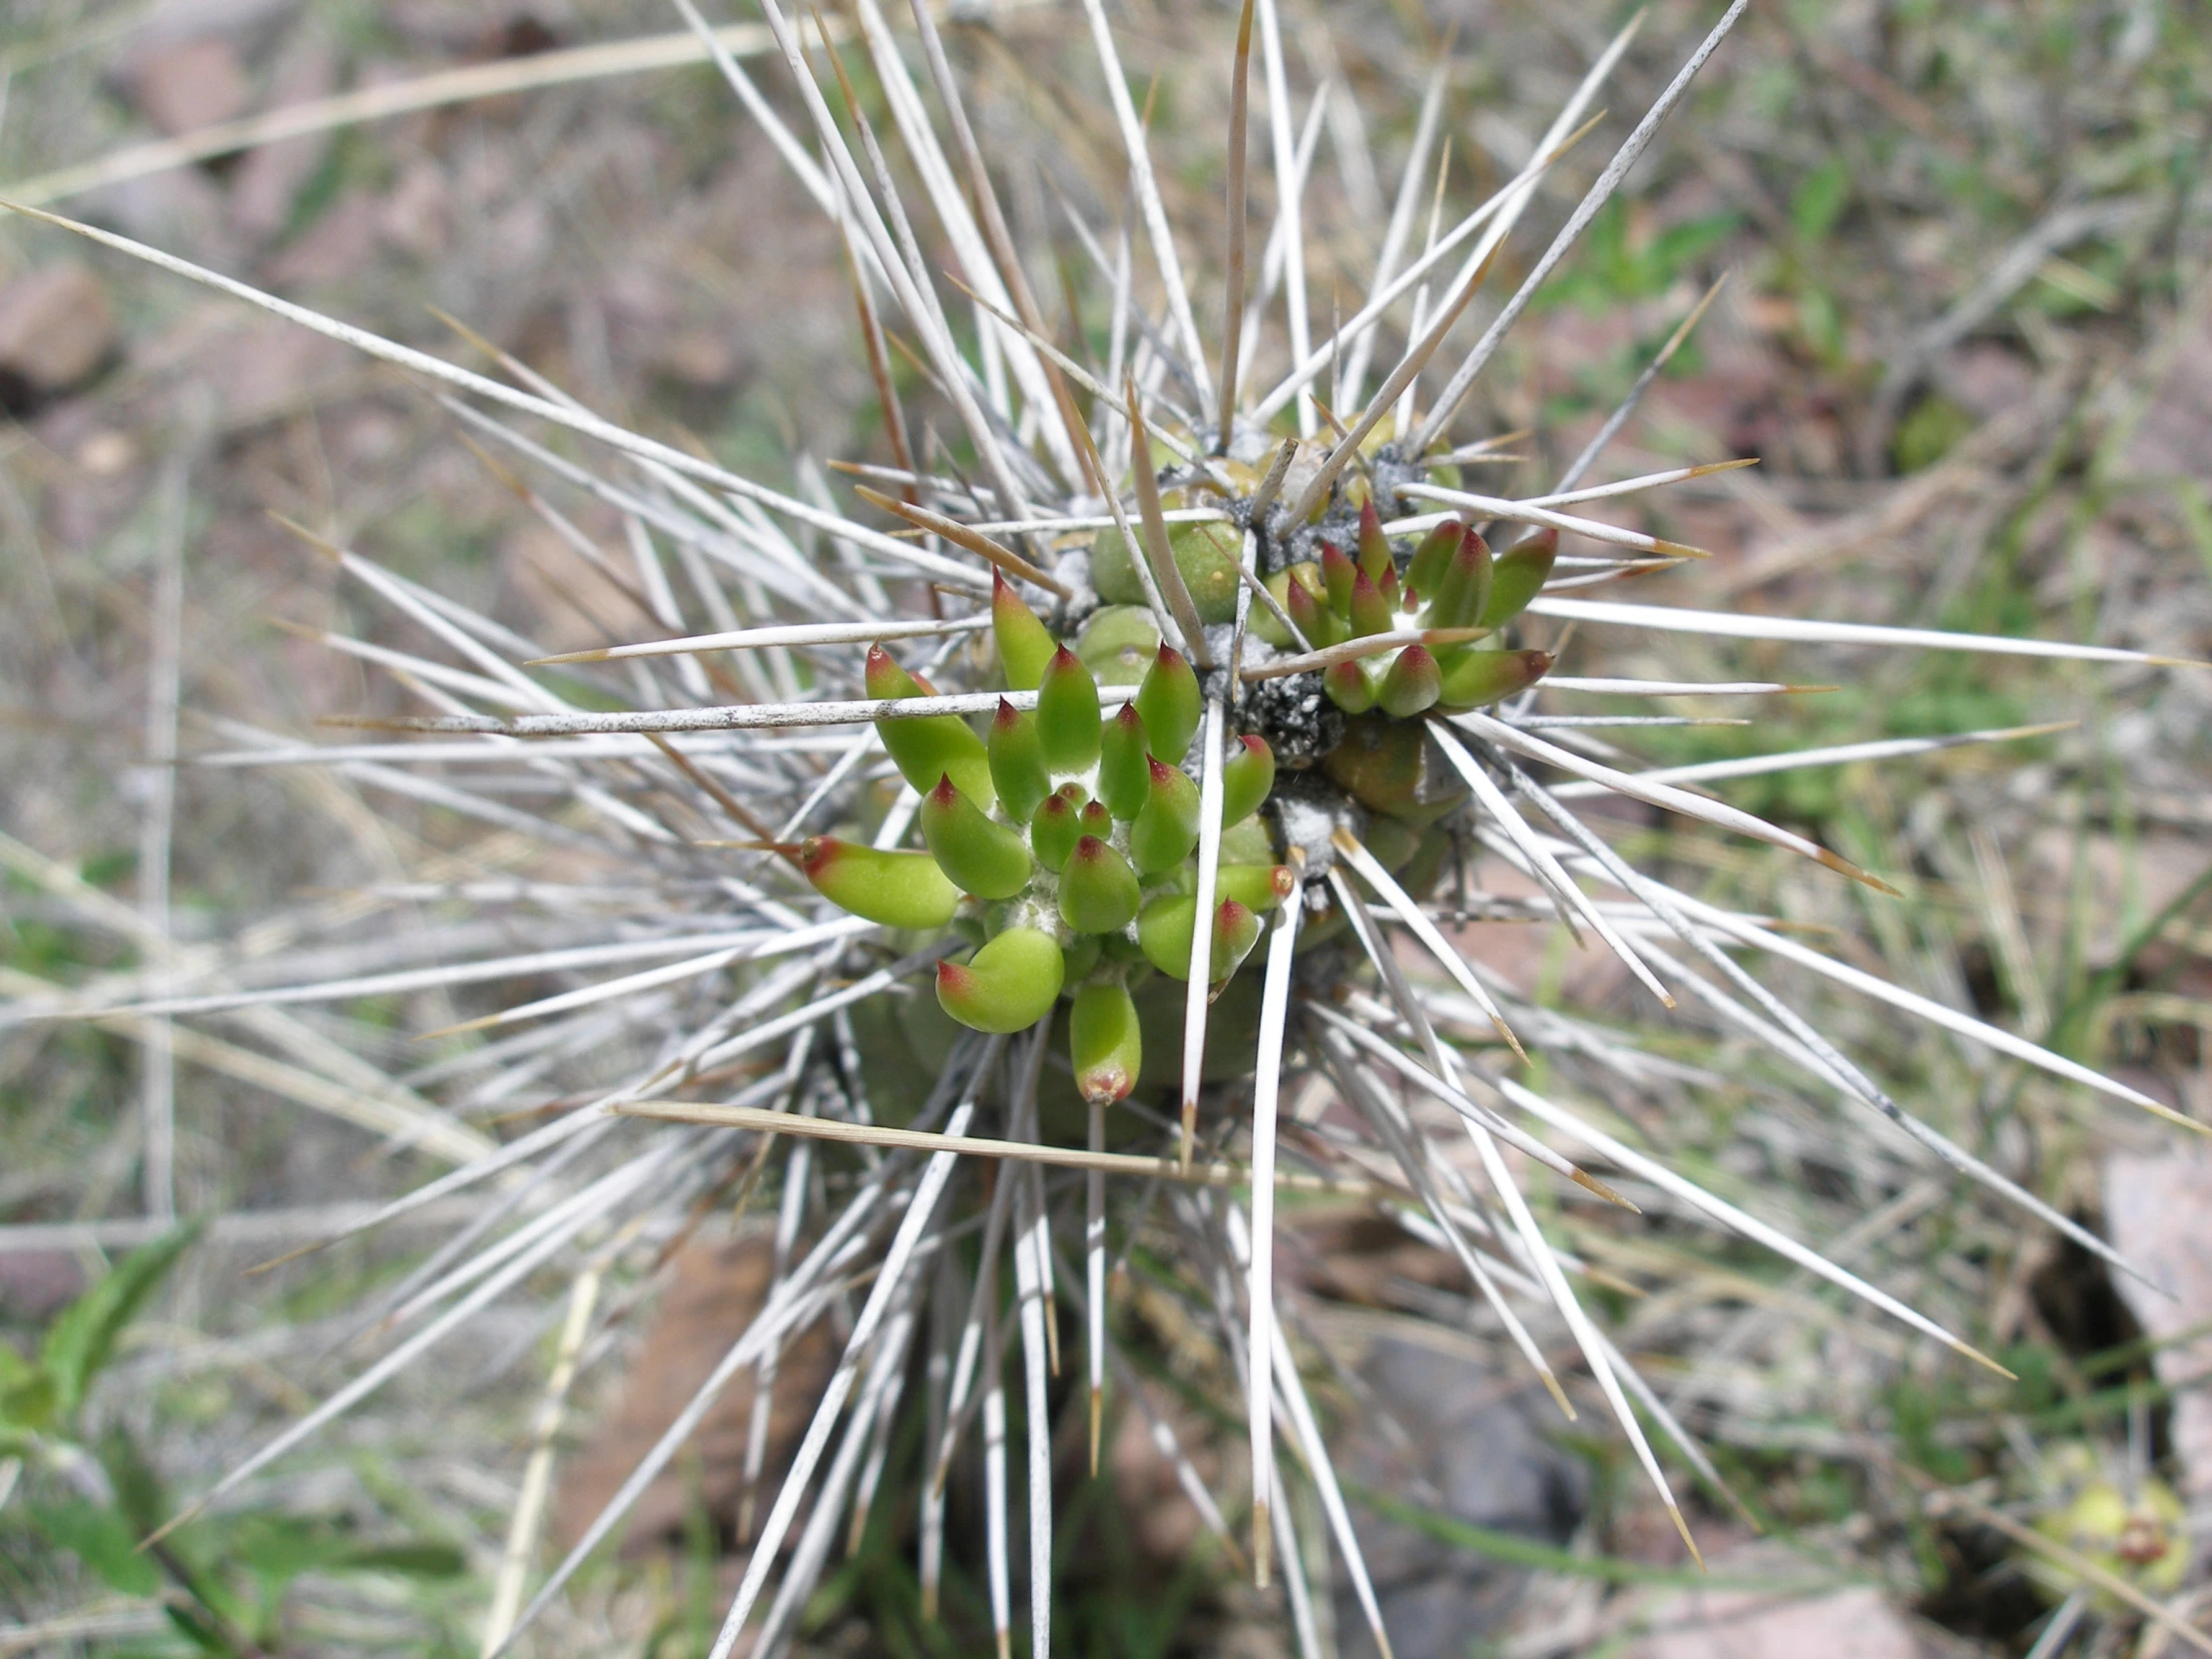 a close up of a small cactus with lots of spines